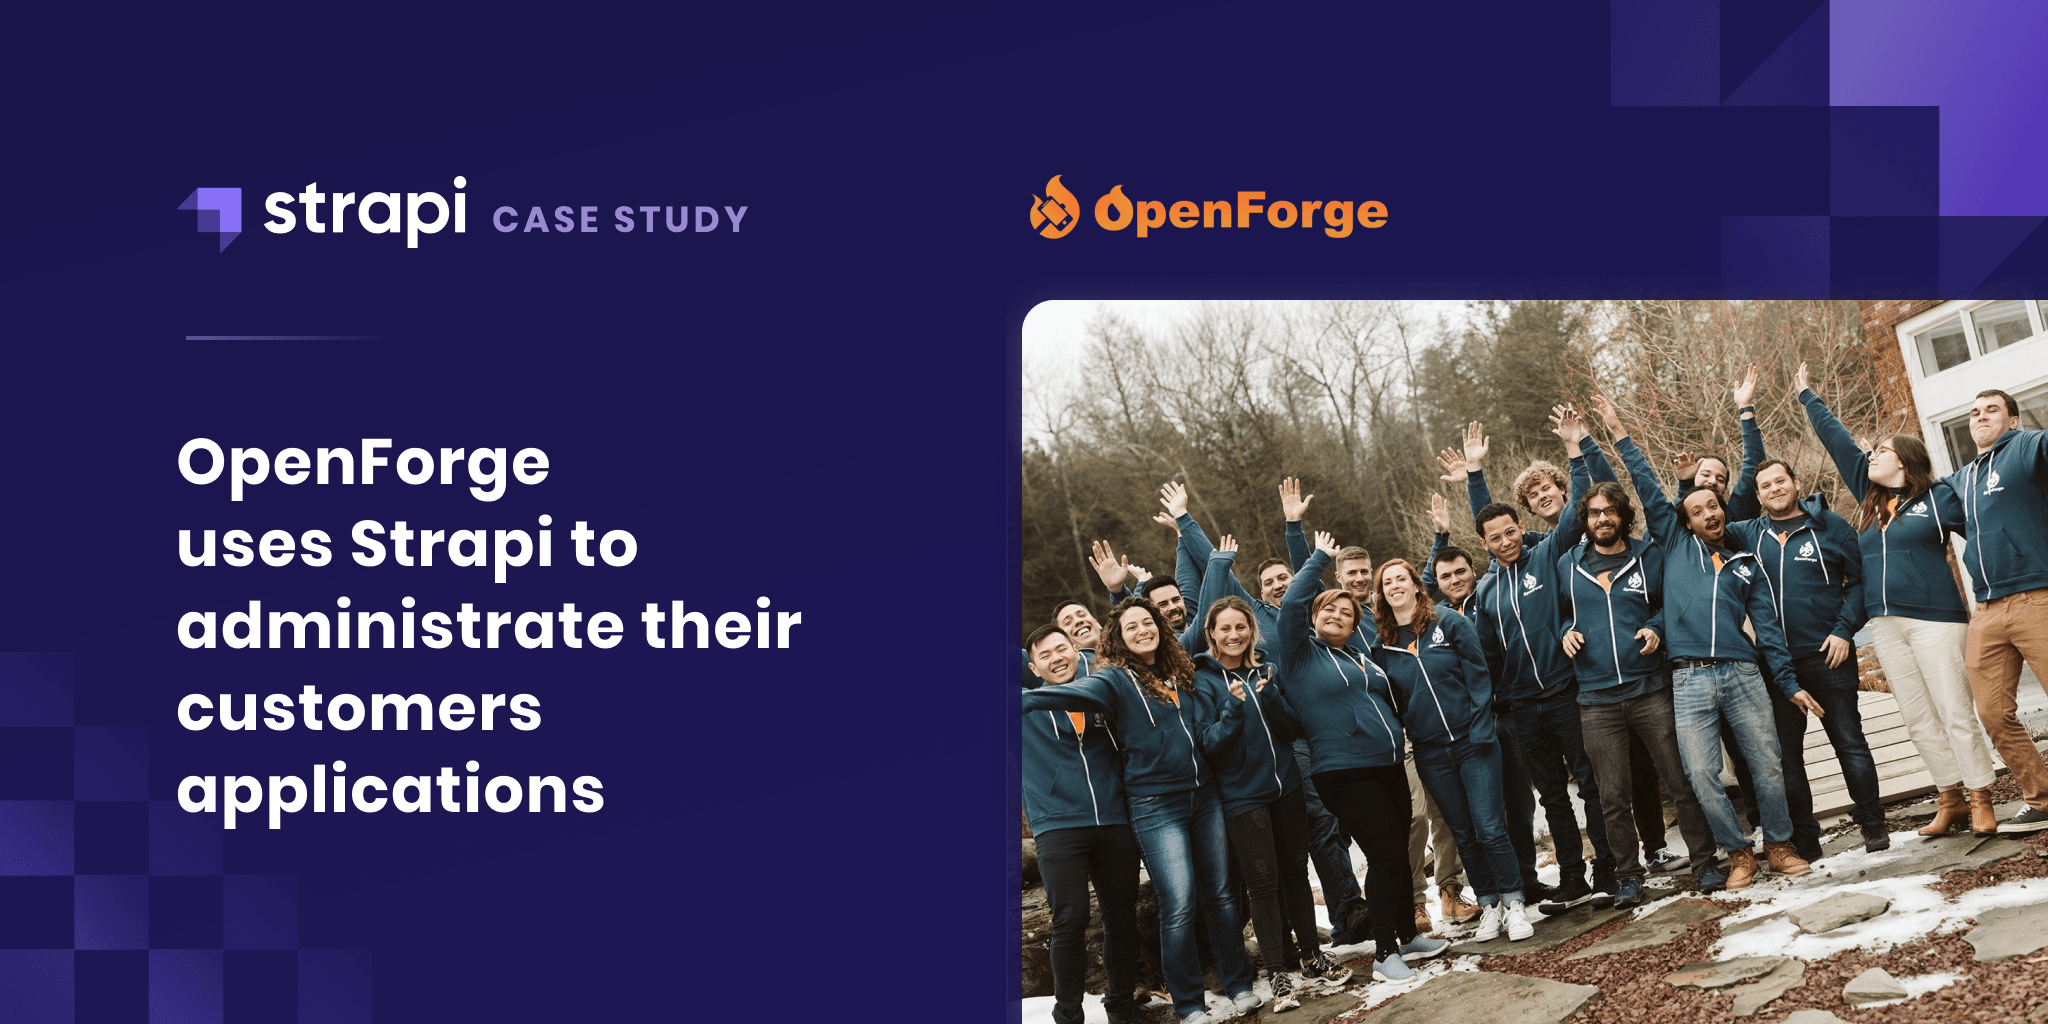 OpenForge uses Strapi to administrate their customers applications